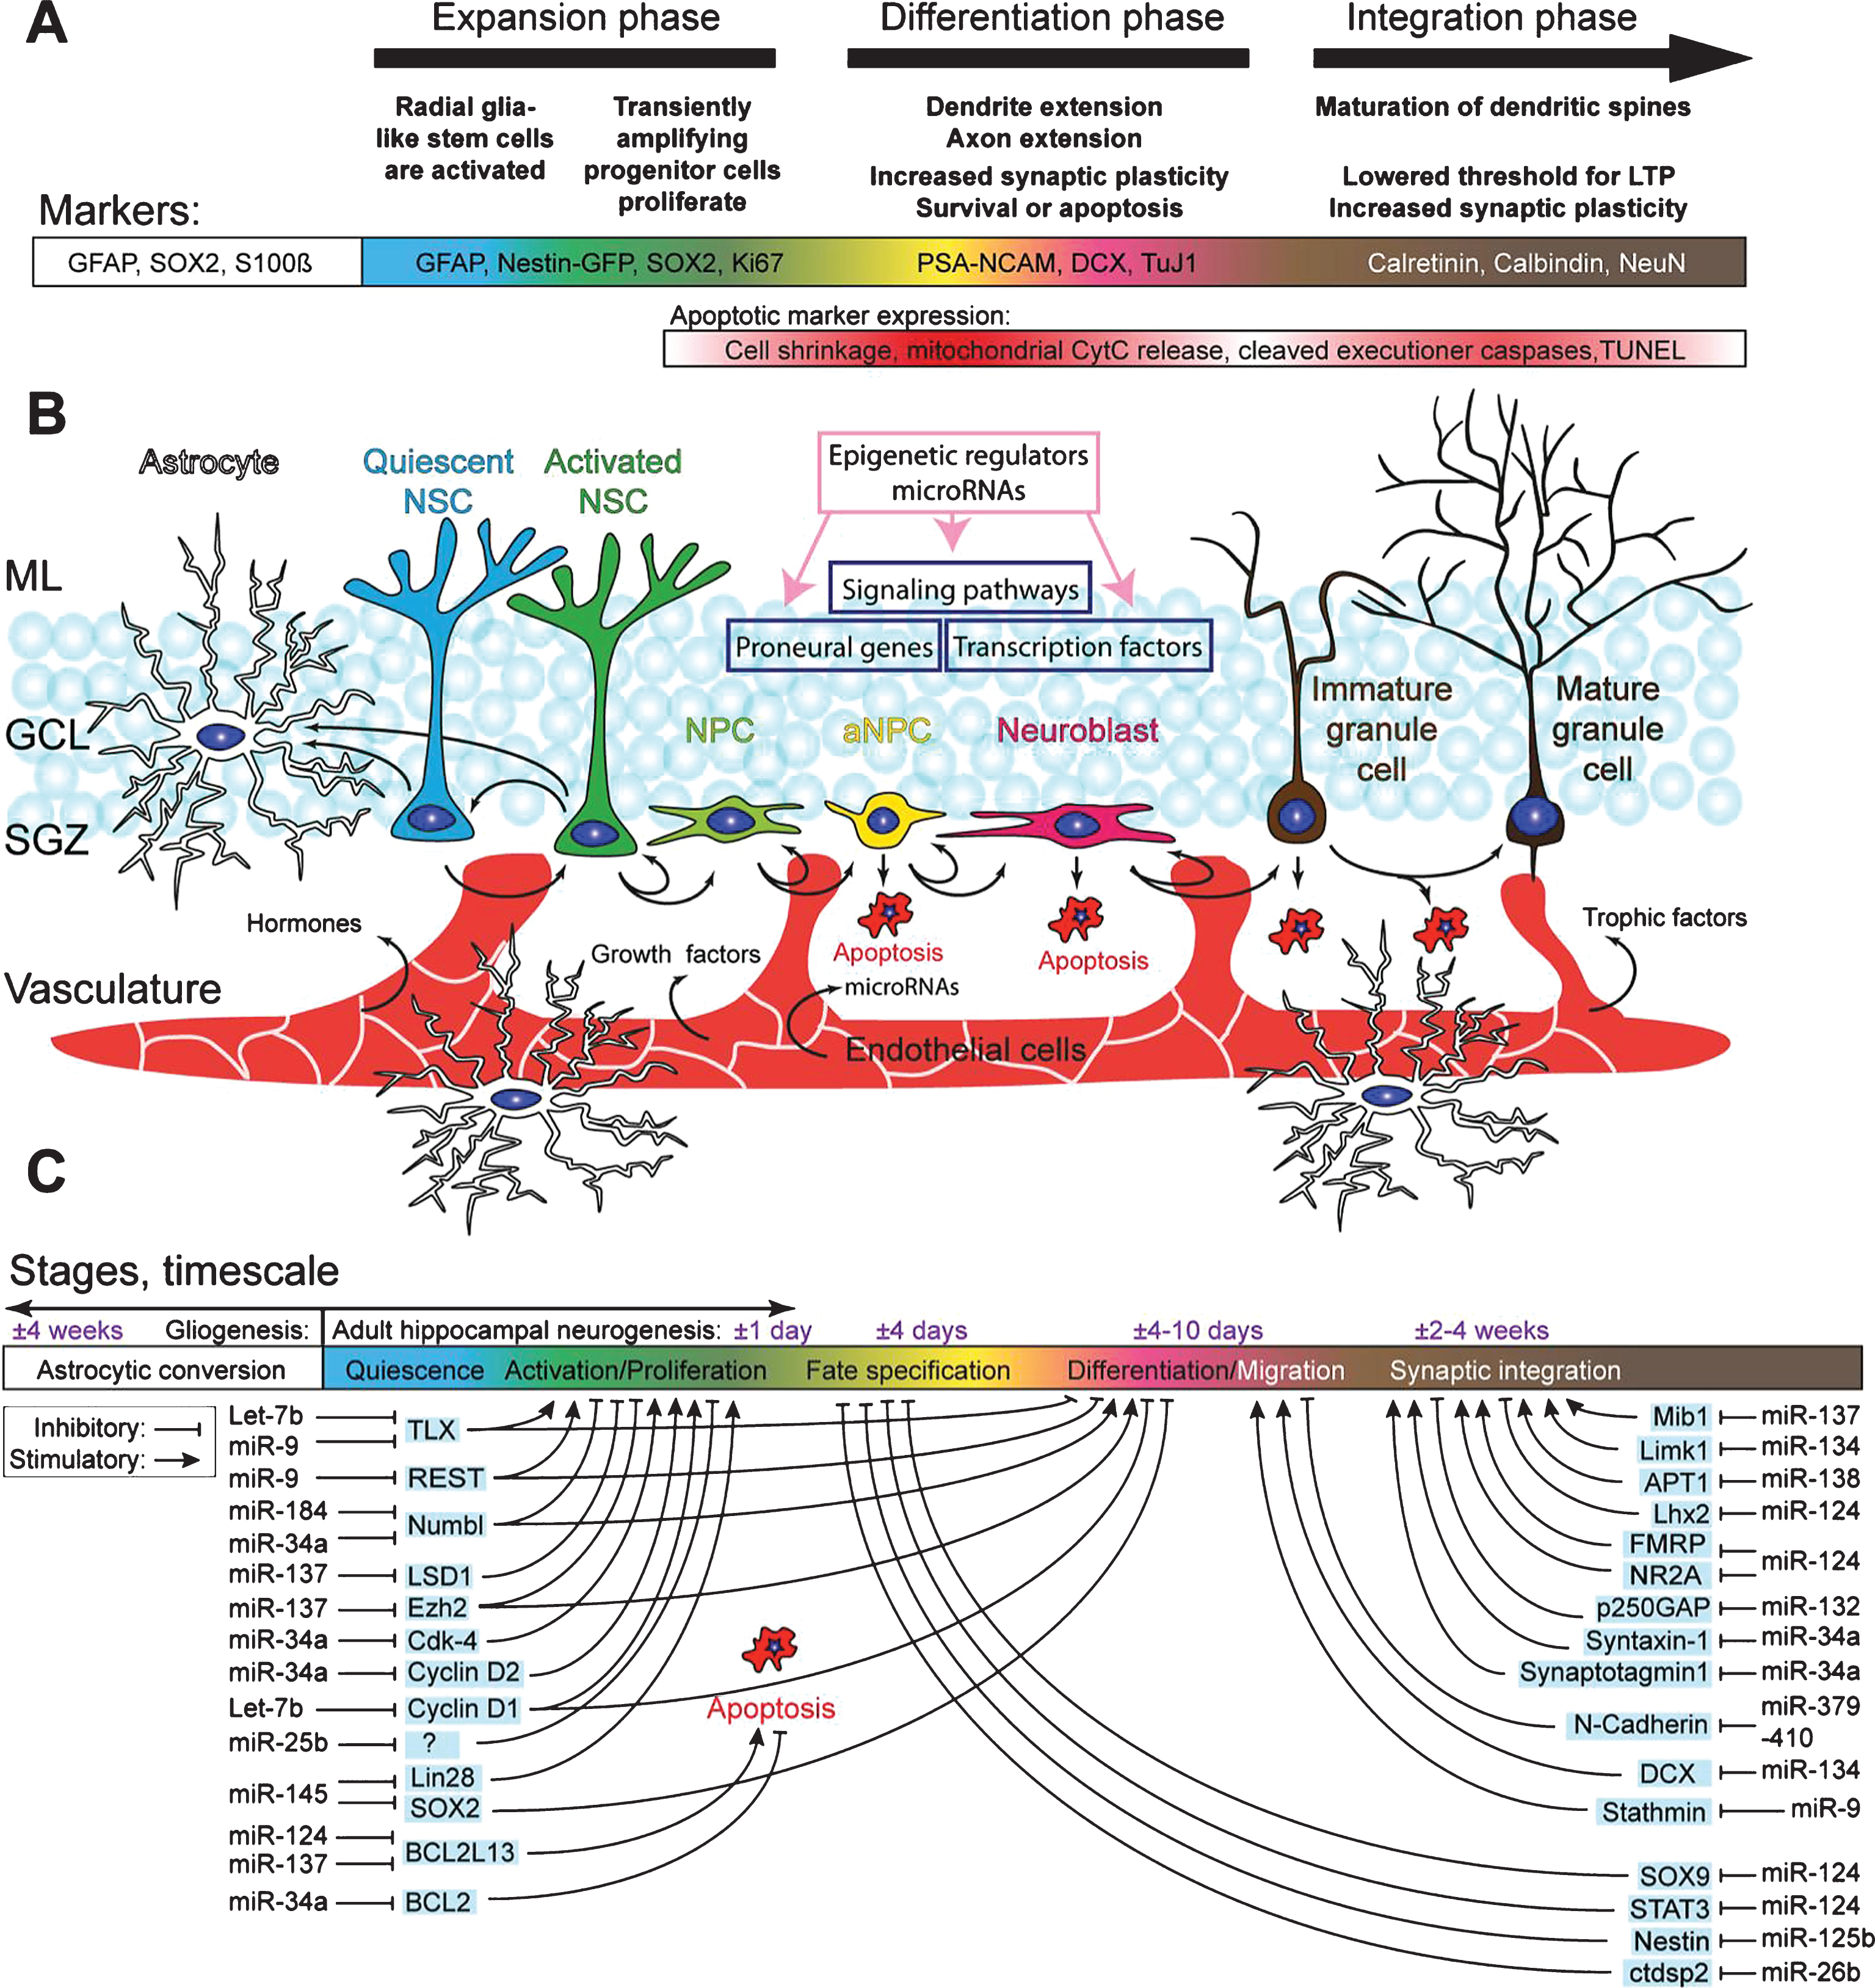 Schematic overview of the hippocampal neurogenic niche, the different processes underlying AHN, and its regulation by microRNAs. A) Overview of the different stages of AHN. Each cell type can be identified by a combination of presence and absence of markers, combined with morphological cellular features. B) Overview of the neurogenic niche and the transition of a NSC into a mature neuron. The complexity of the neurogenic niche, consisting of multiple cell types in close association with the vasculature, allows for both local and distant cell communication. Distant cell communication occurs via factors released in the bloodstream, such as cell-extrinsic miRNAs, growth factors (VEGF and bFGF), hormones, and trophic factors (BDNF). Other cell-intrinsic factors, such as miRNAsm TLX signaling, notch signaling, and REST (purple boxes), and cell extrinsic factors such as HDACs, DNA methylation, and miRNAs (pink box), complete the coordinated regulated of AHN. C) MiRNAs regulate various key pathways important in AHN. Depicted are miRNAs of which a clear link with neurogenesis has been identified, together with their targets through which the miRNAs might exert their effect.